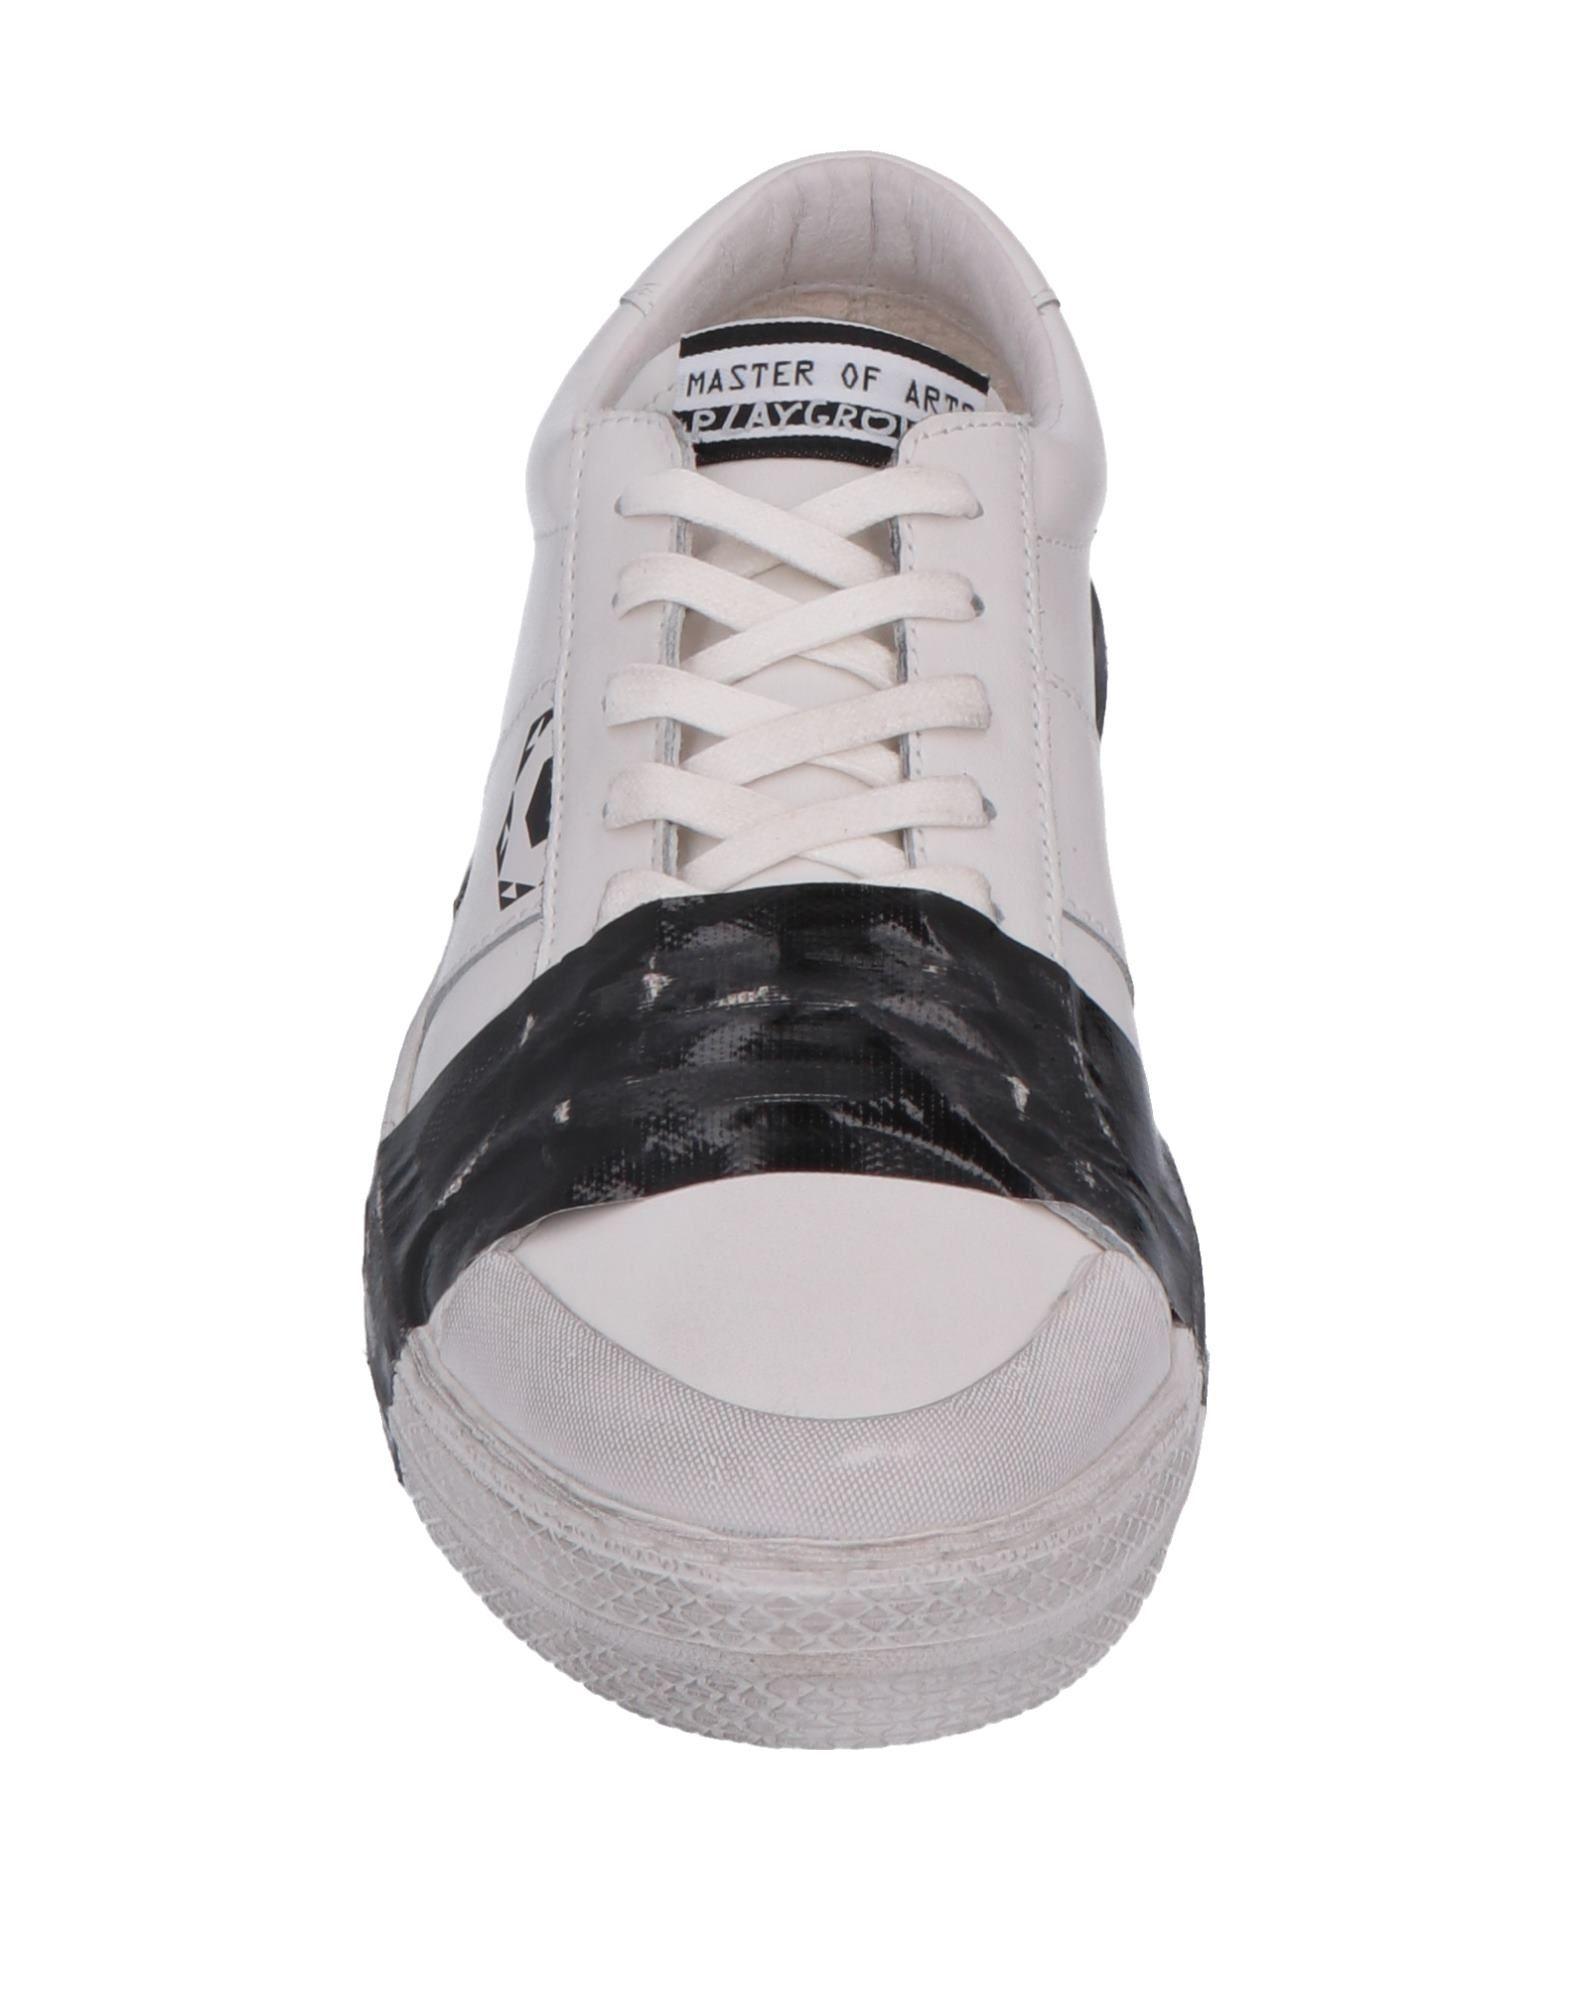 MOA Low-tops & Sneakers in White for Men - Lyst